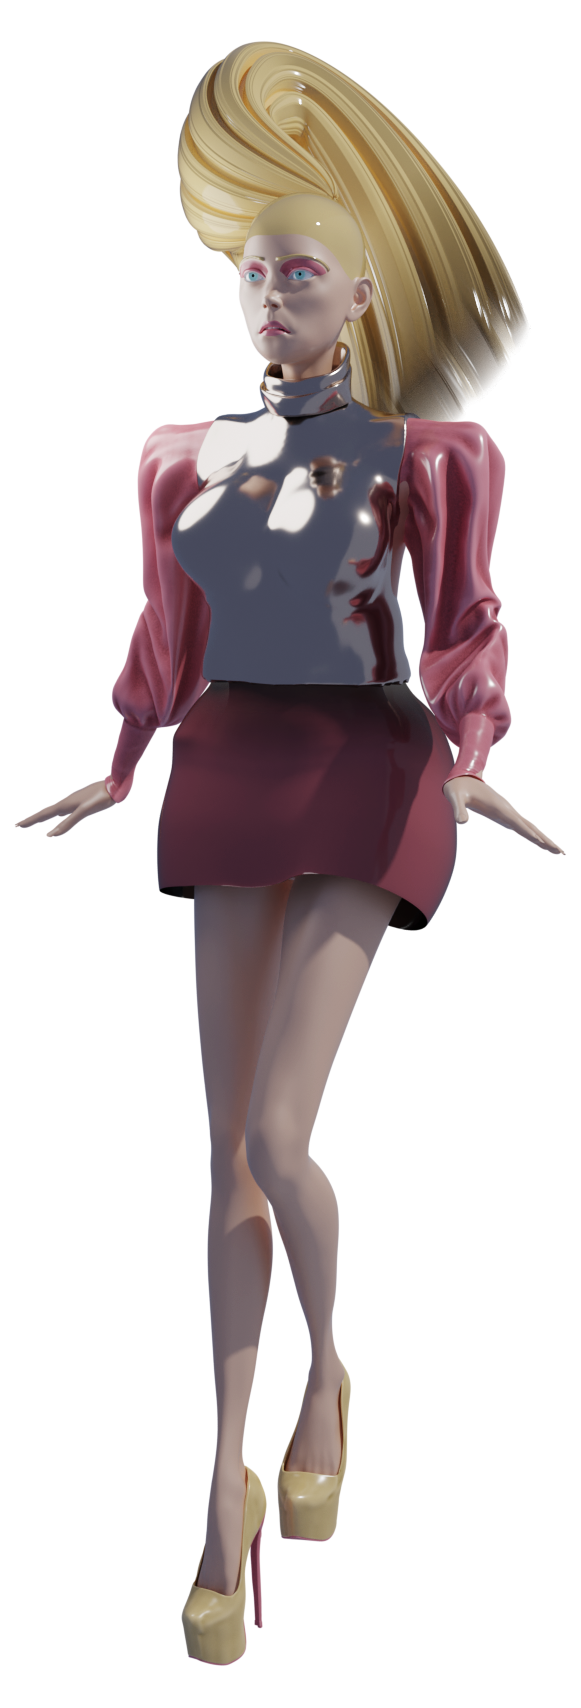 3D render of a woman